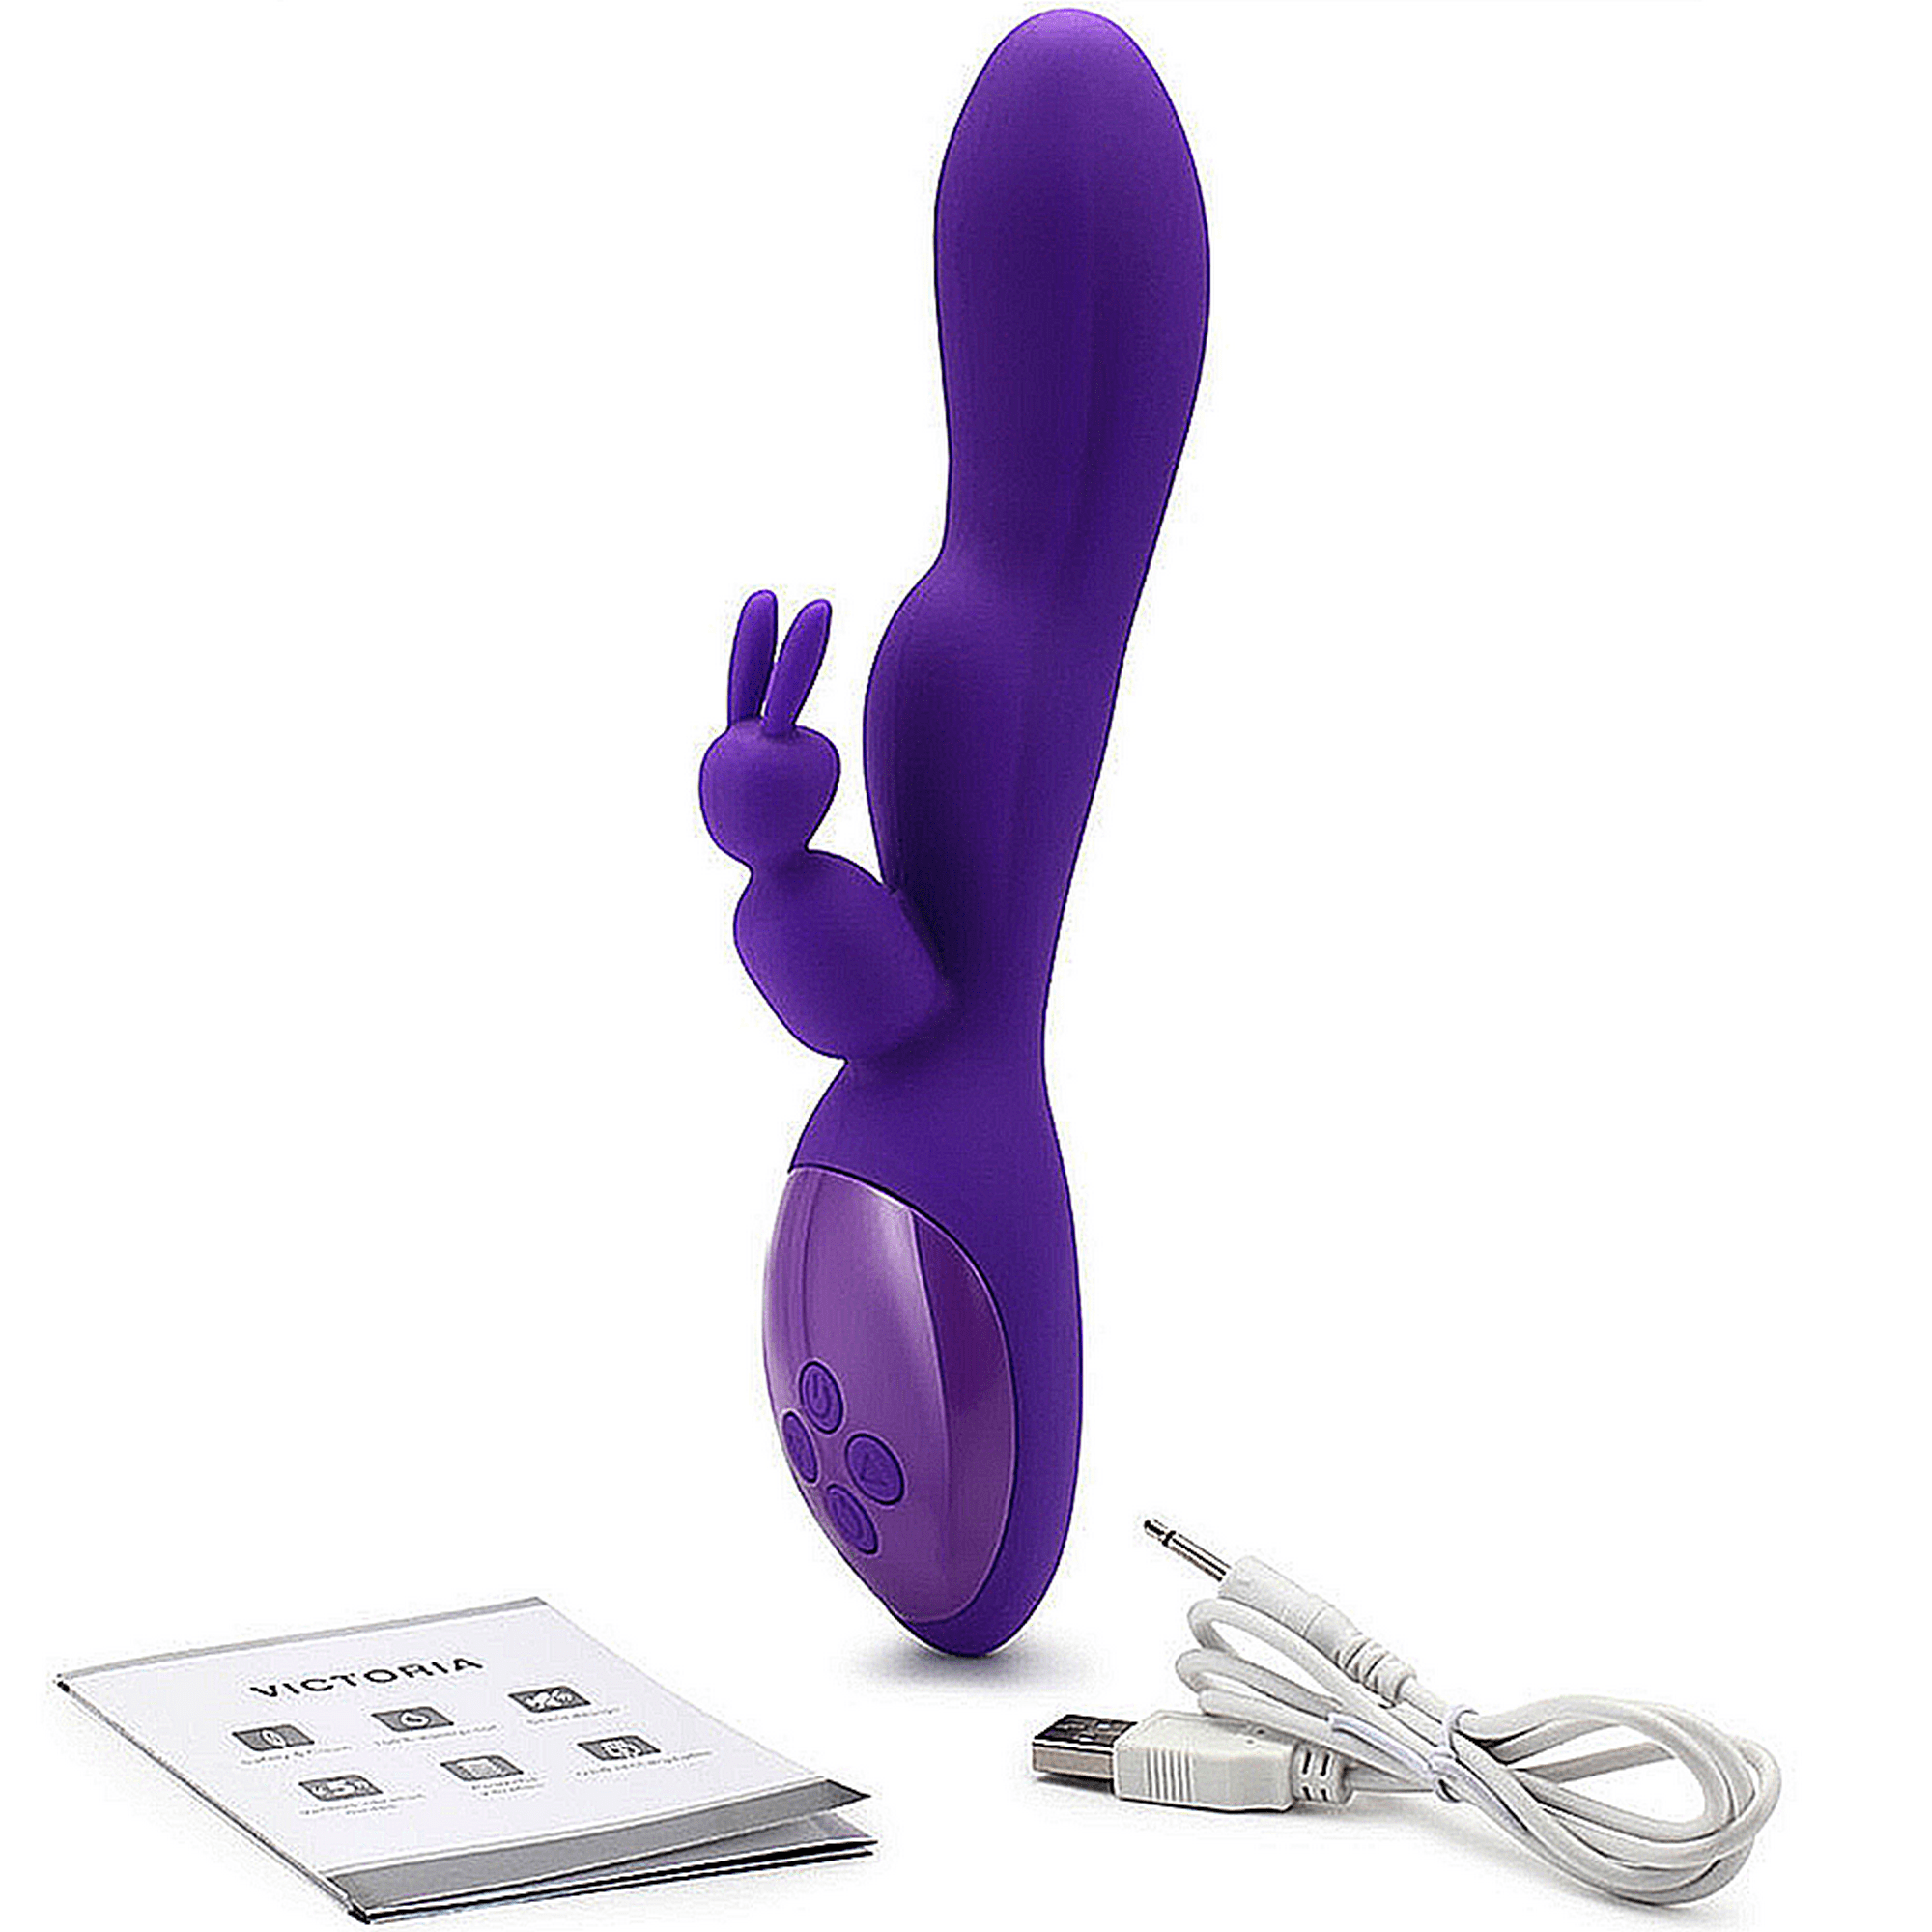 LotFancy Rabbit Vibrator for Women, G Spot and Clitoral Stimulator, Adult Sex Toys for Couple, Purple photo